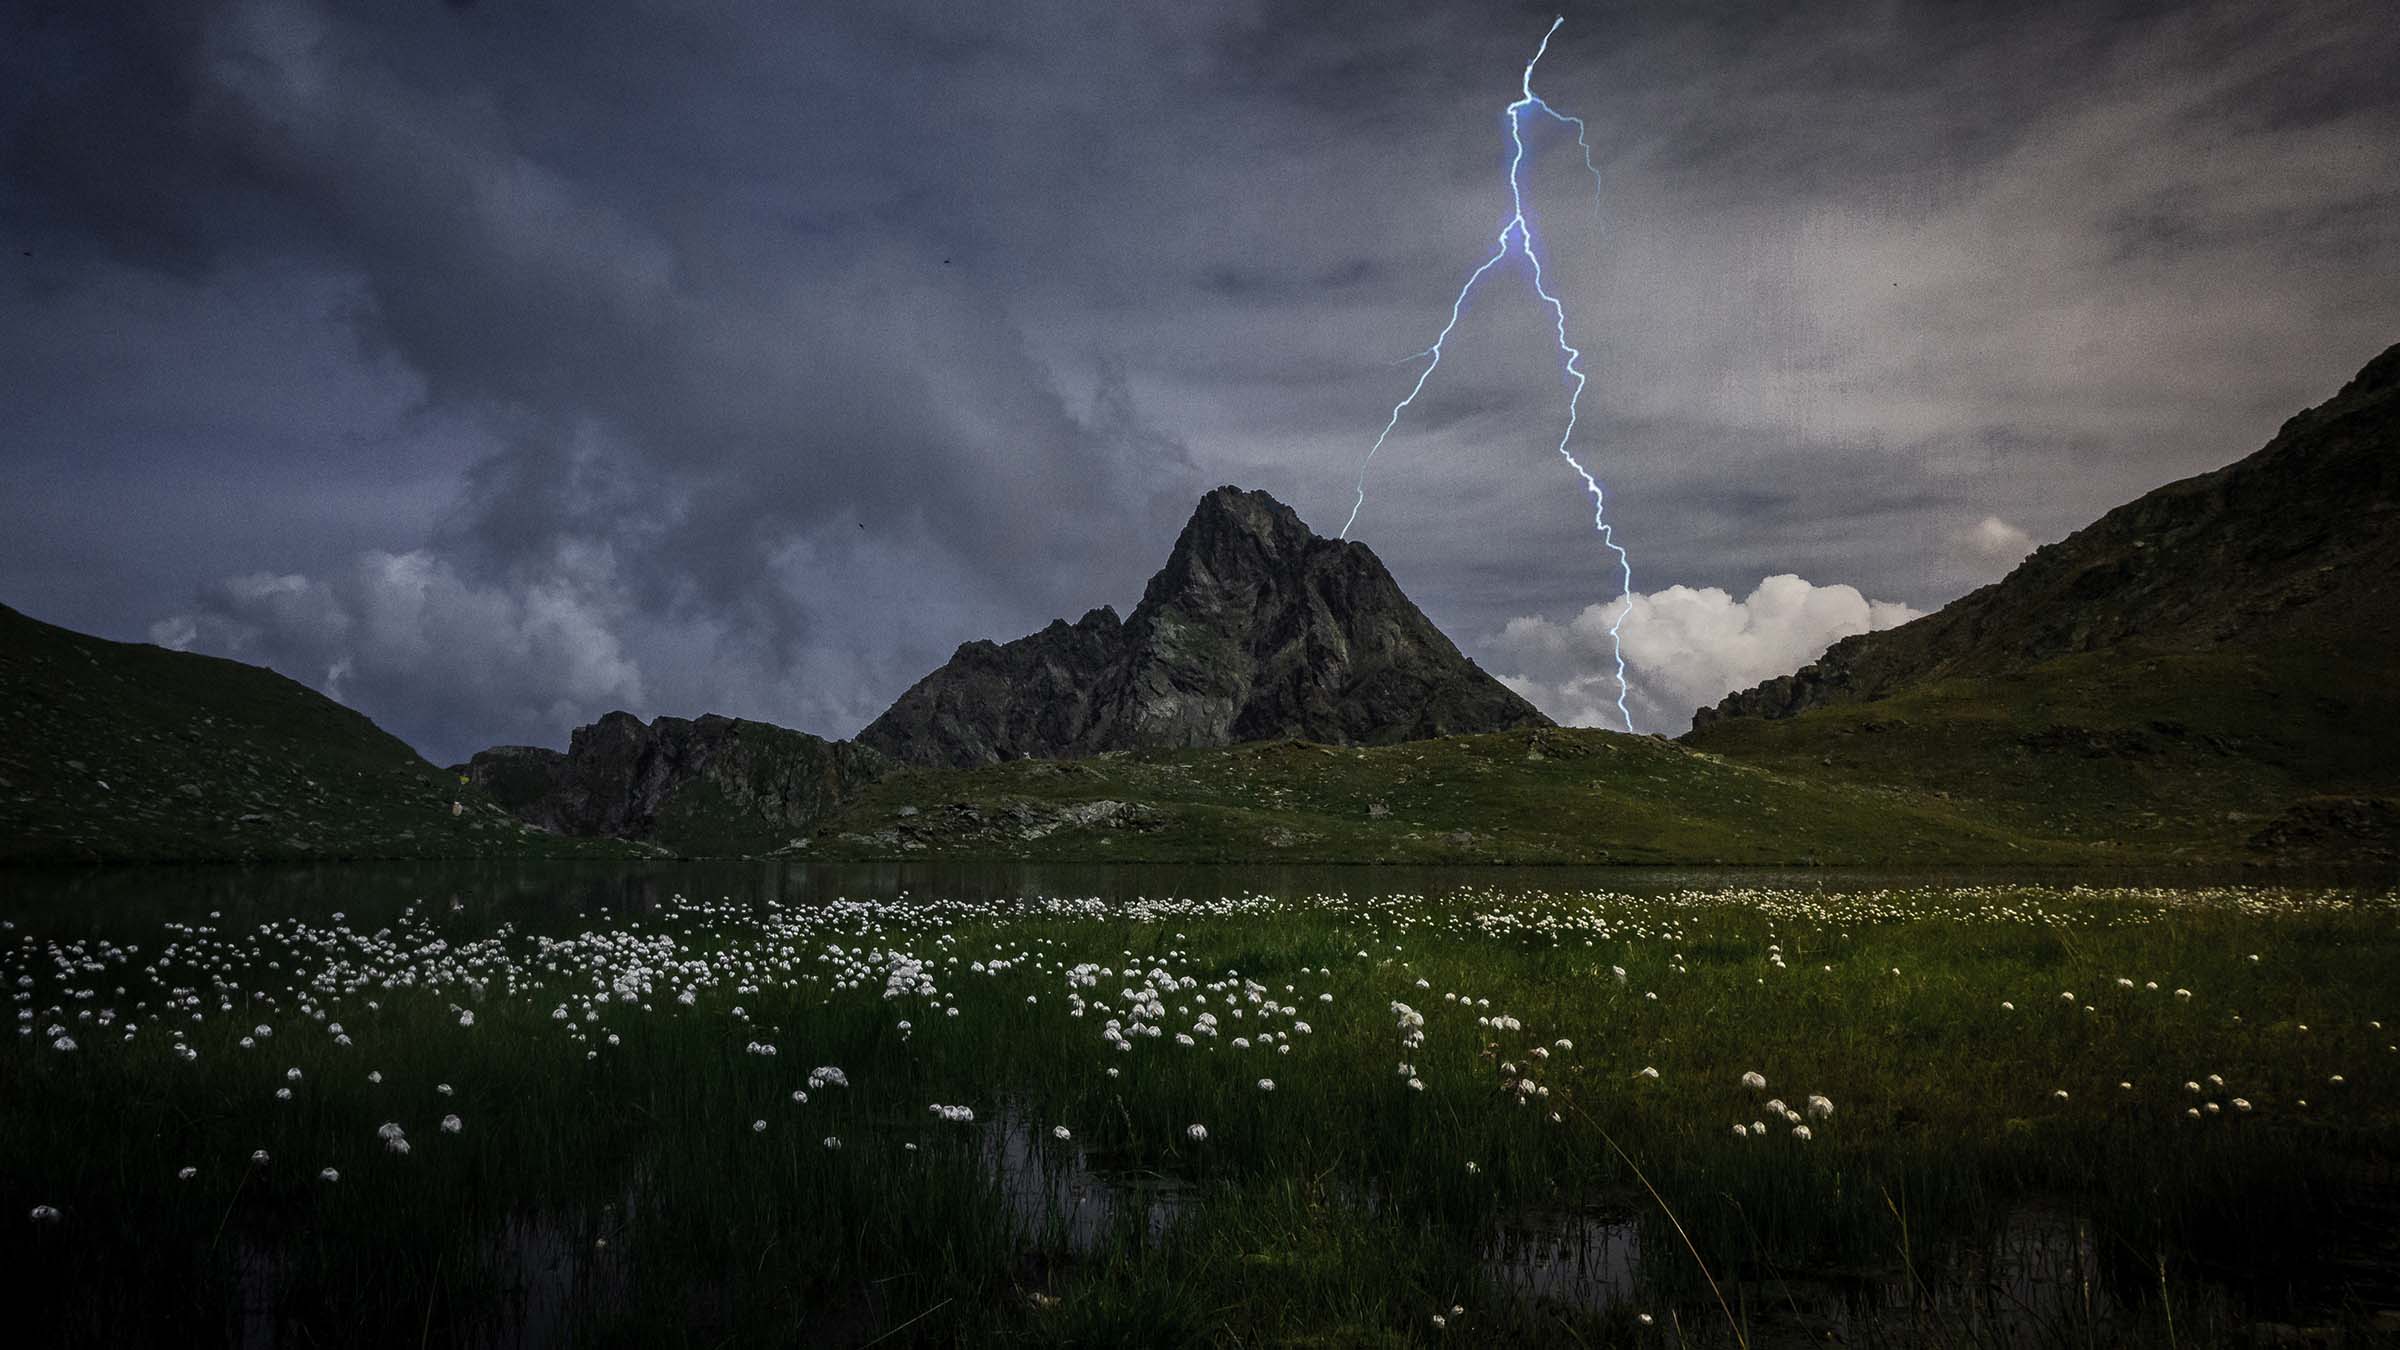 A Viking in the Vines:  A lightning bolt from clear sky changed my life  forever - though it was a real lightning strike and the sky was not clear